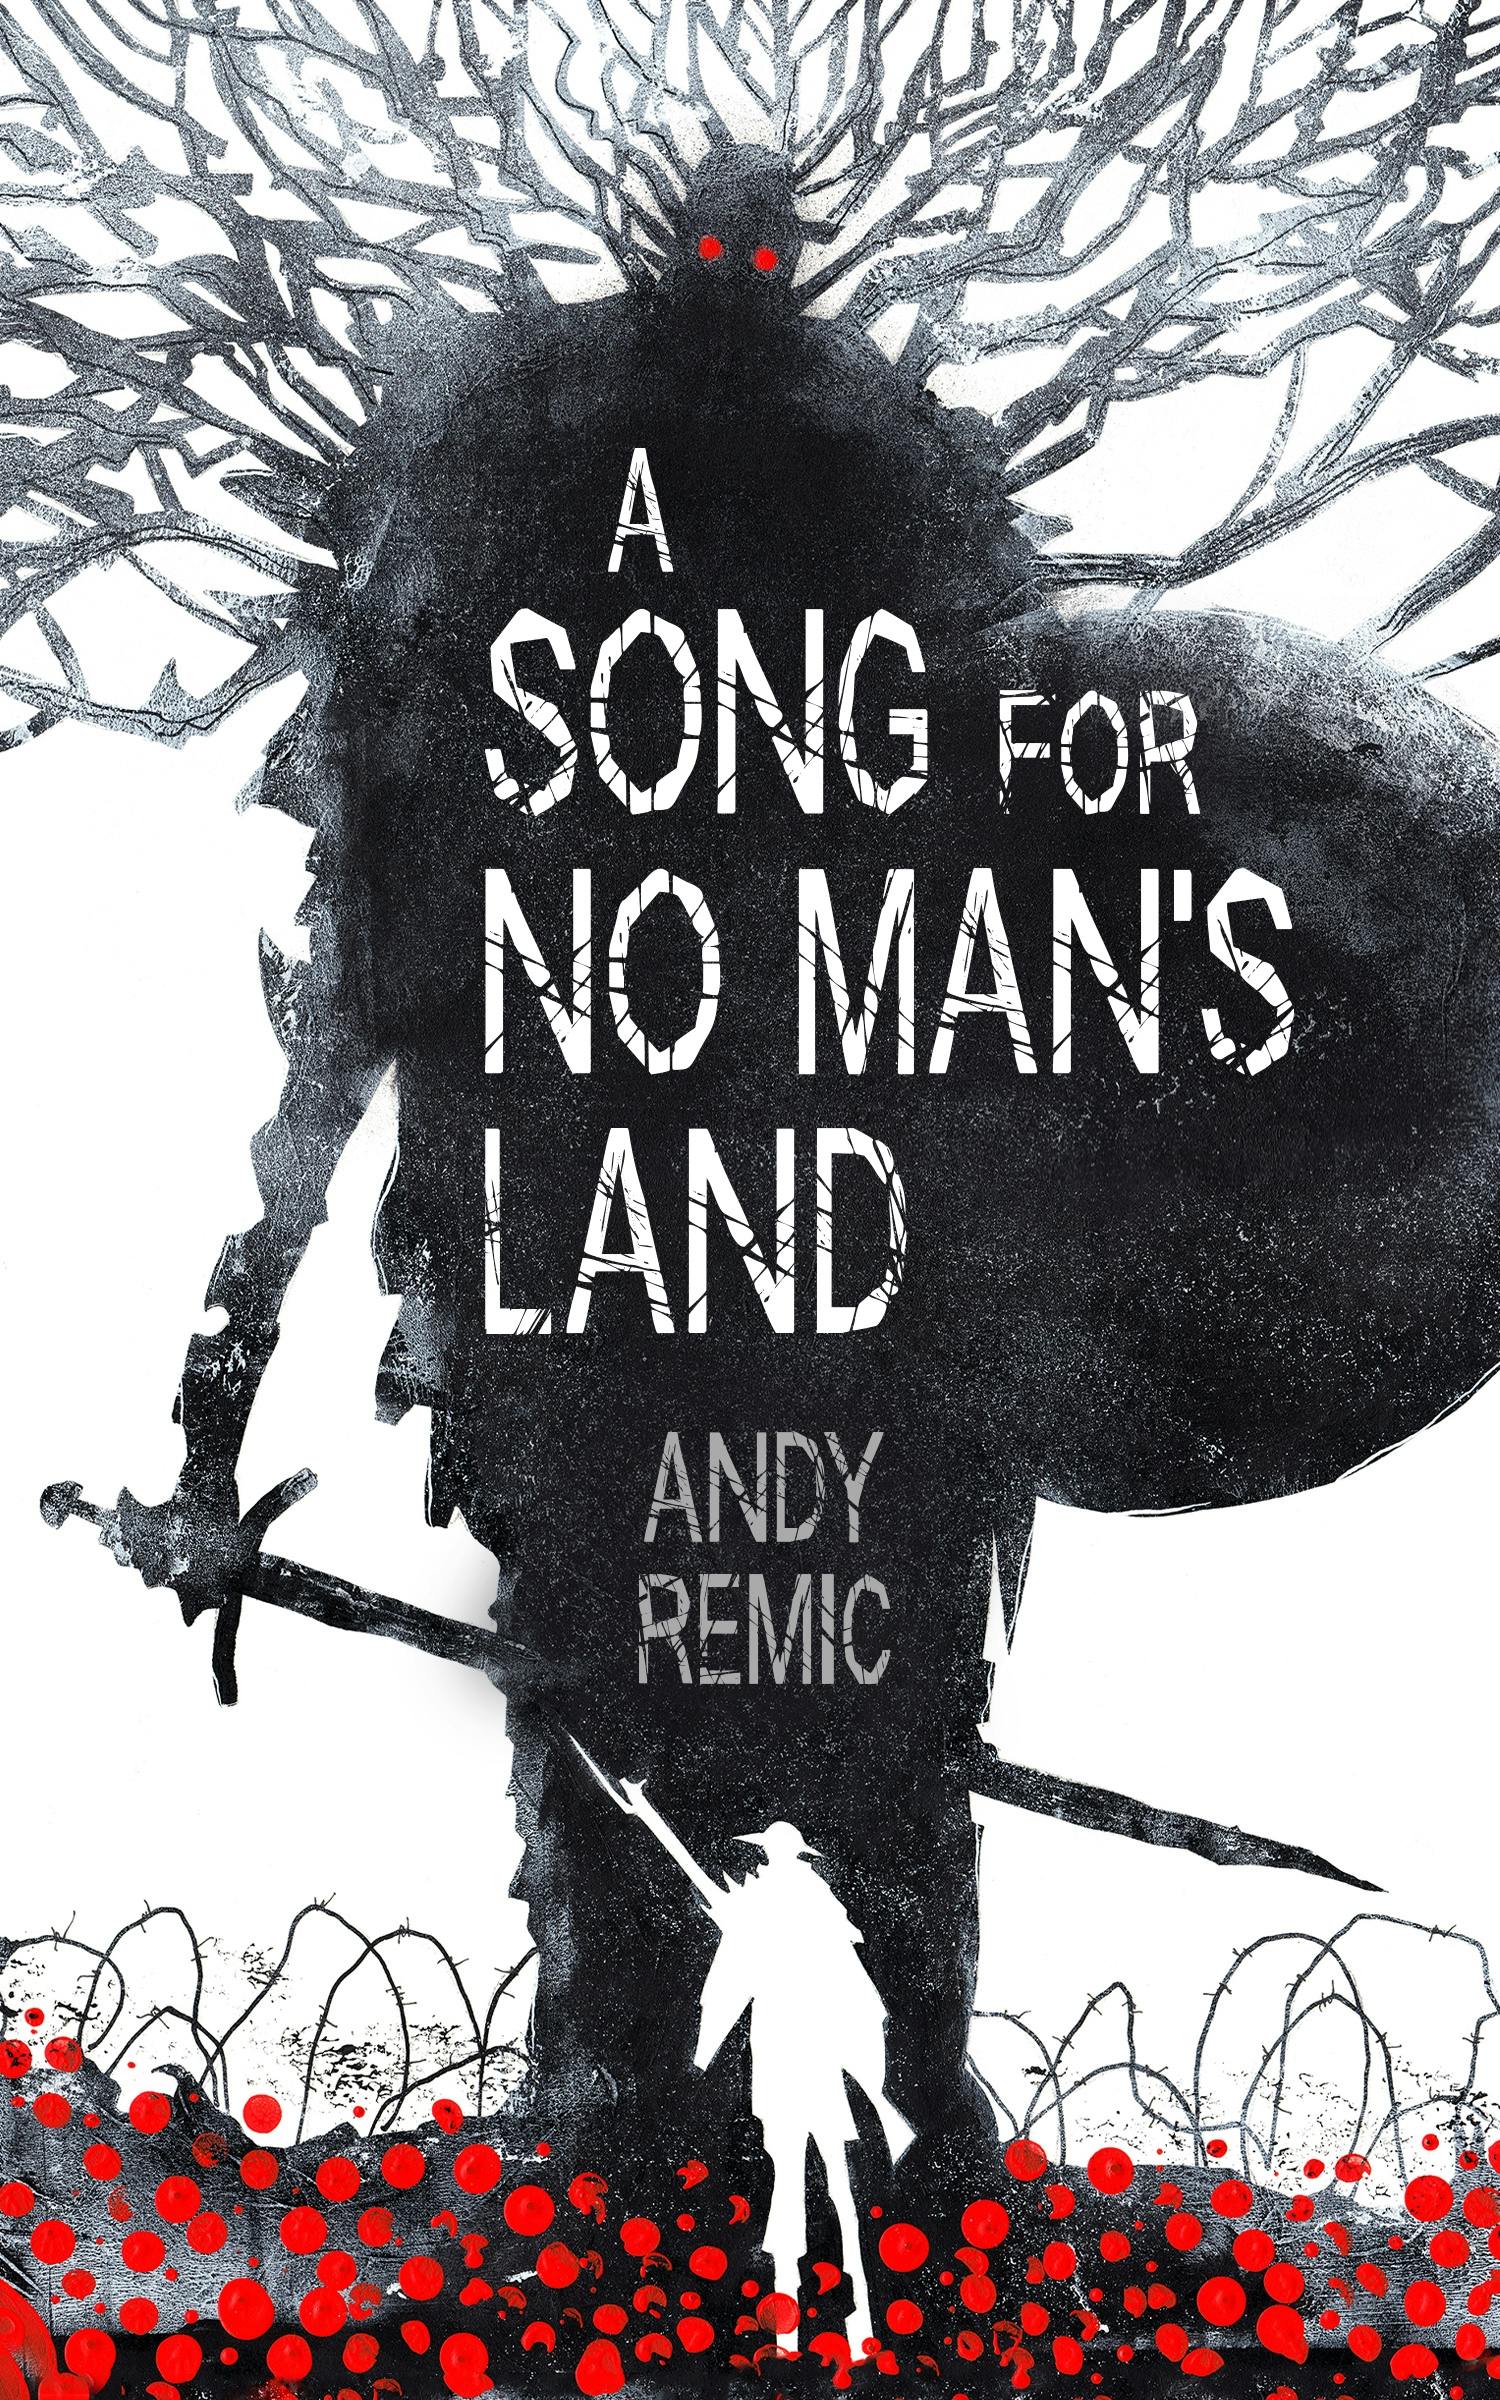 Song for No Man's Land